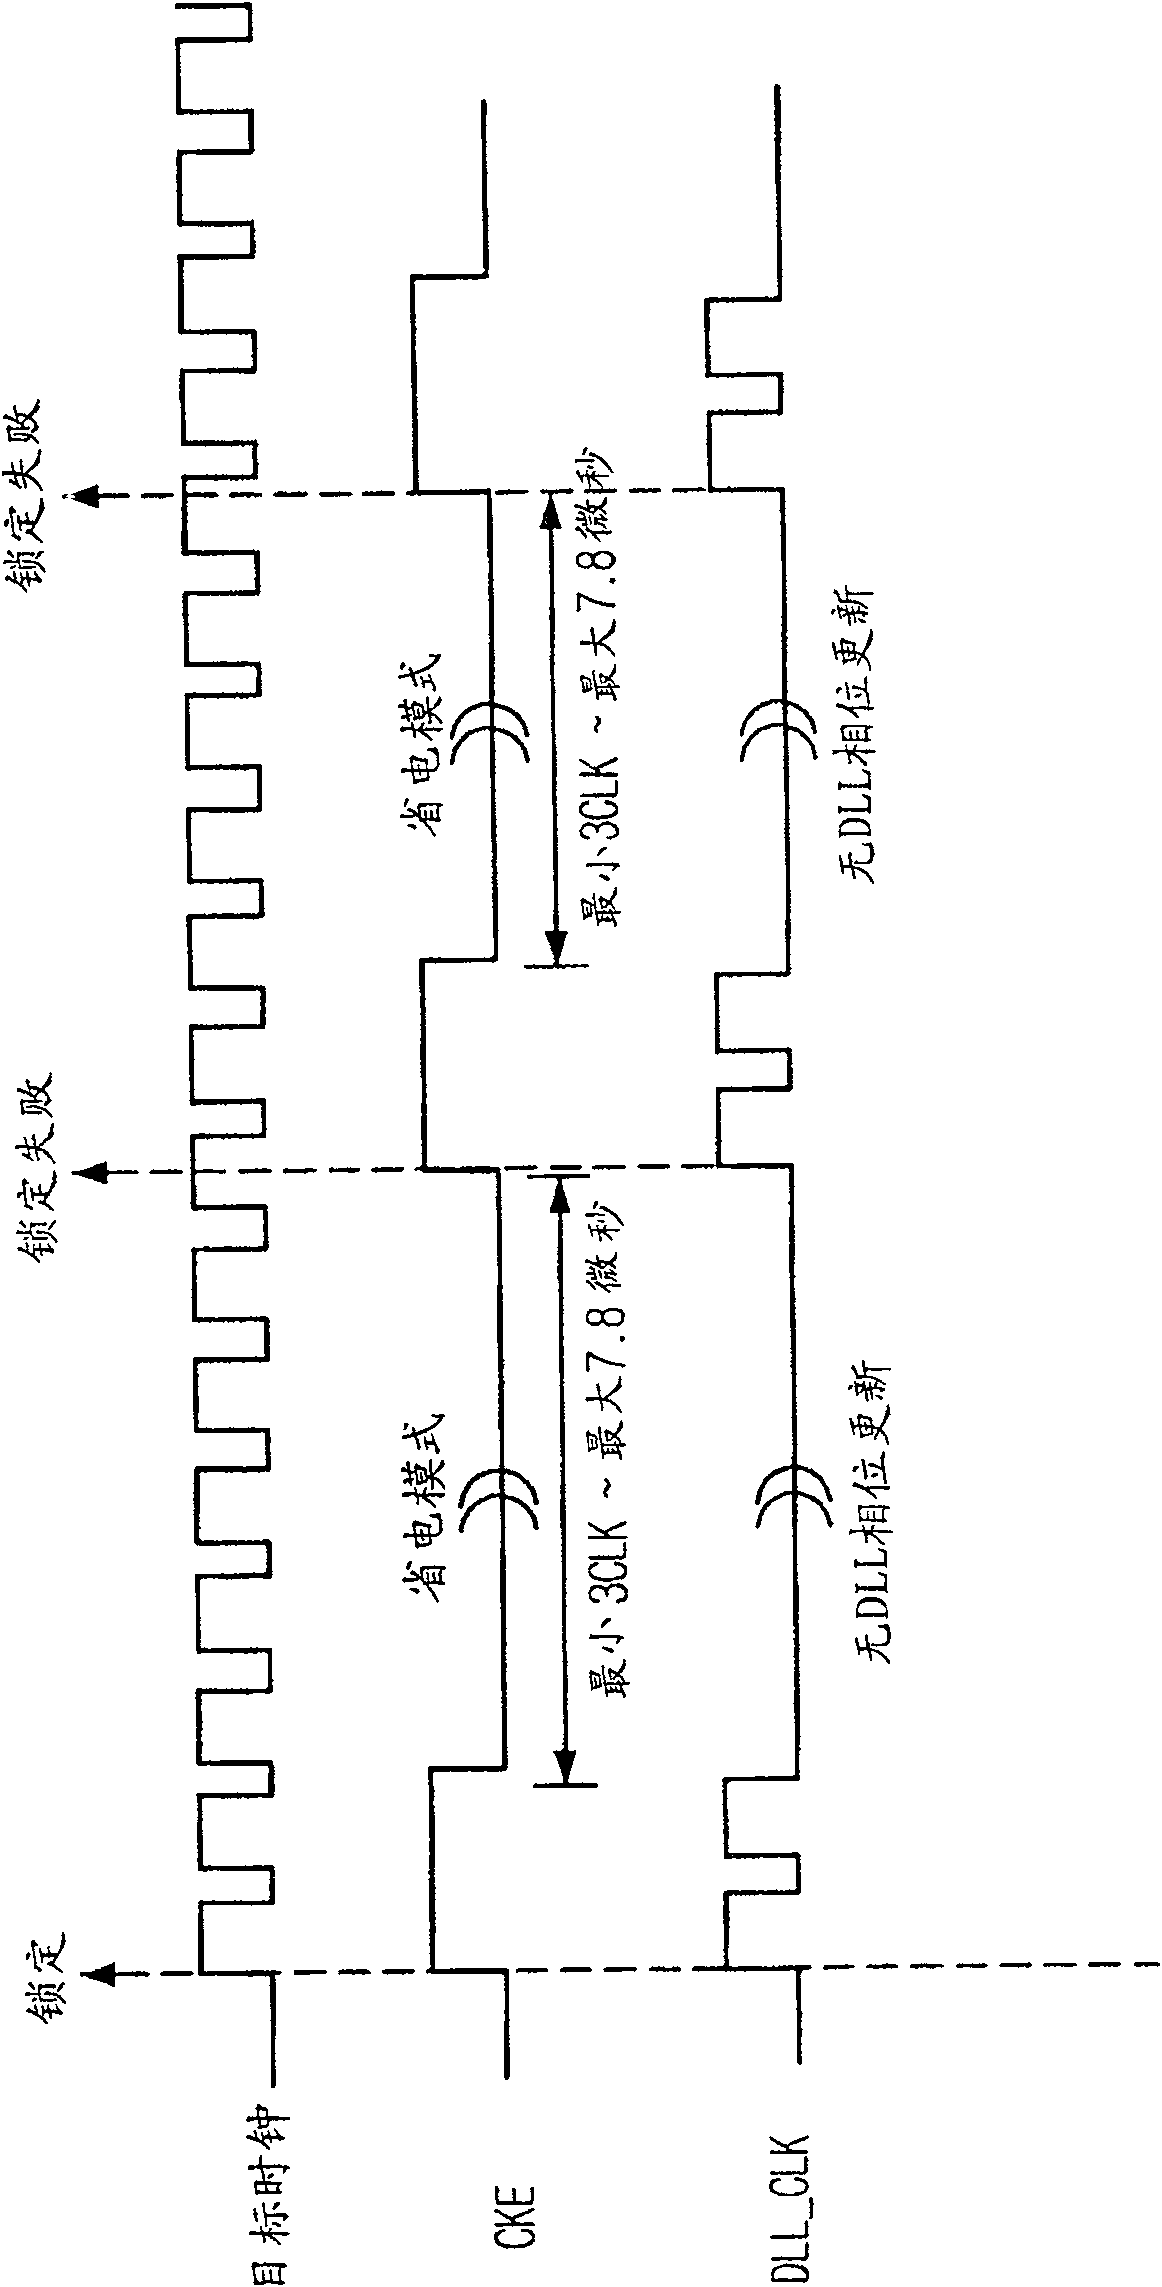 Delay locked loop circuit and method for provding delay locked loop clock of synchronous memory device